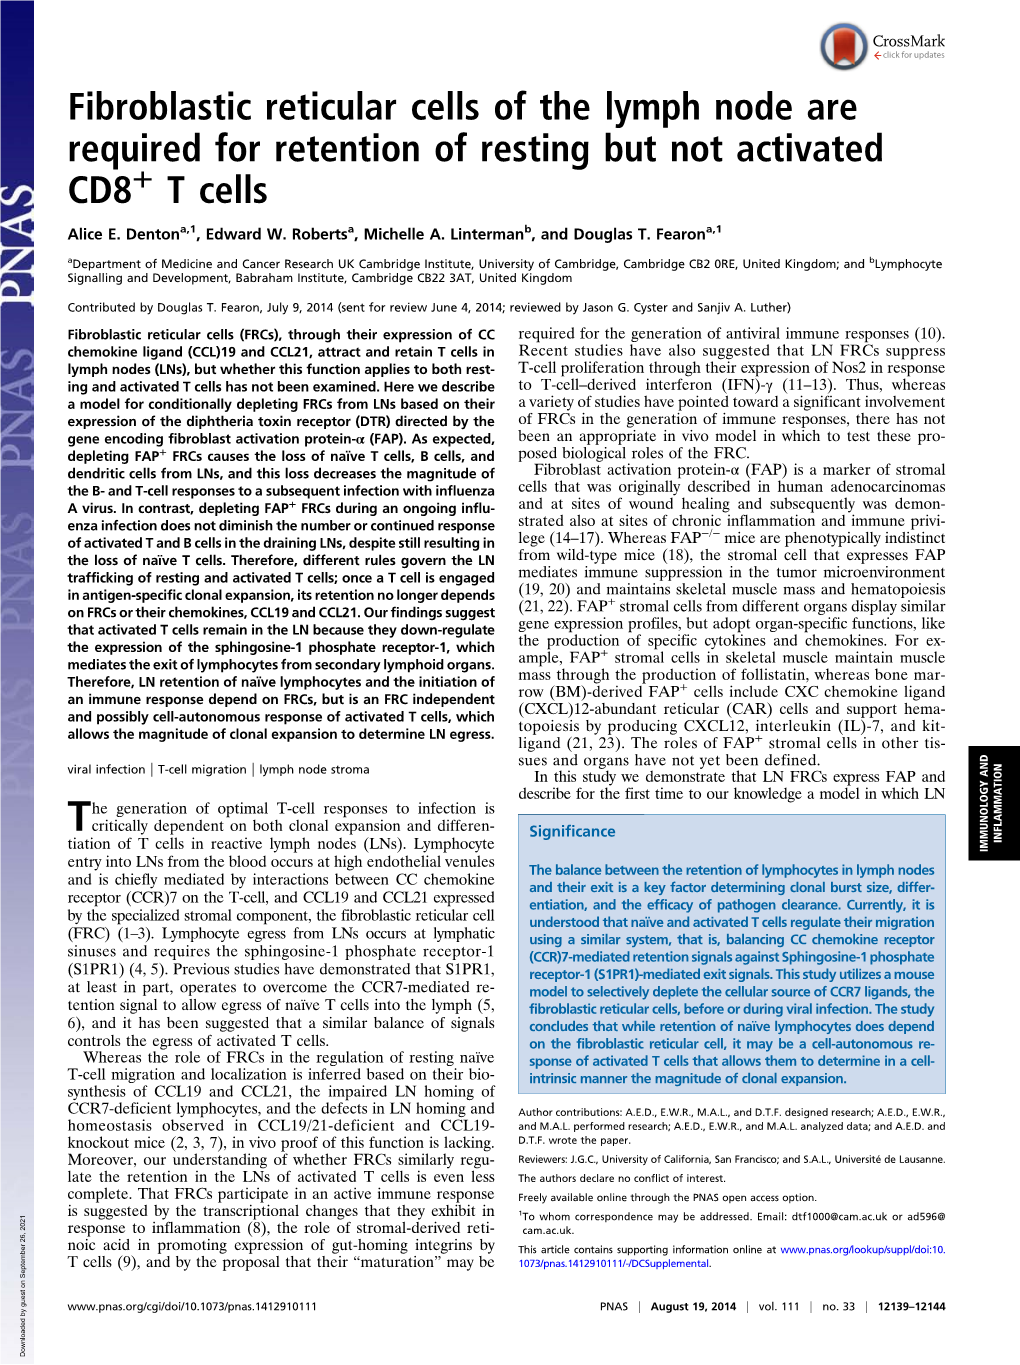 Fibroblastic Reticular Cells of the Lymph Node Are Required for Retention of Resting but Not Activated + CD8 T Cells